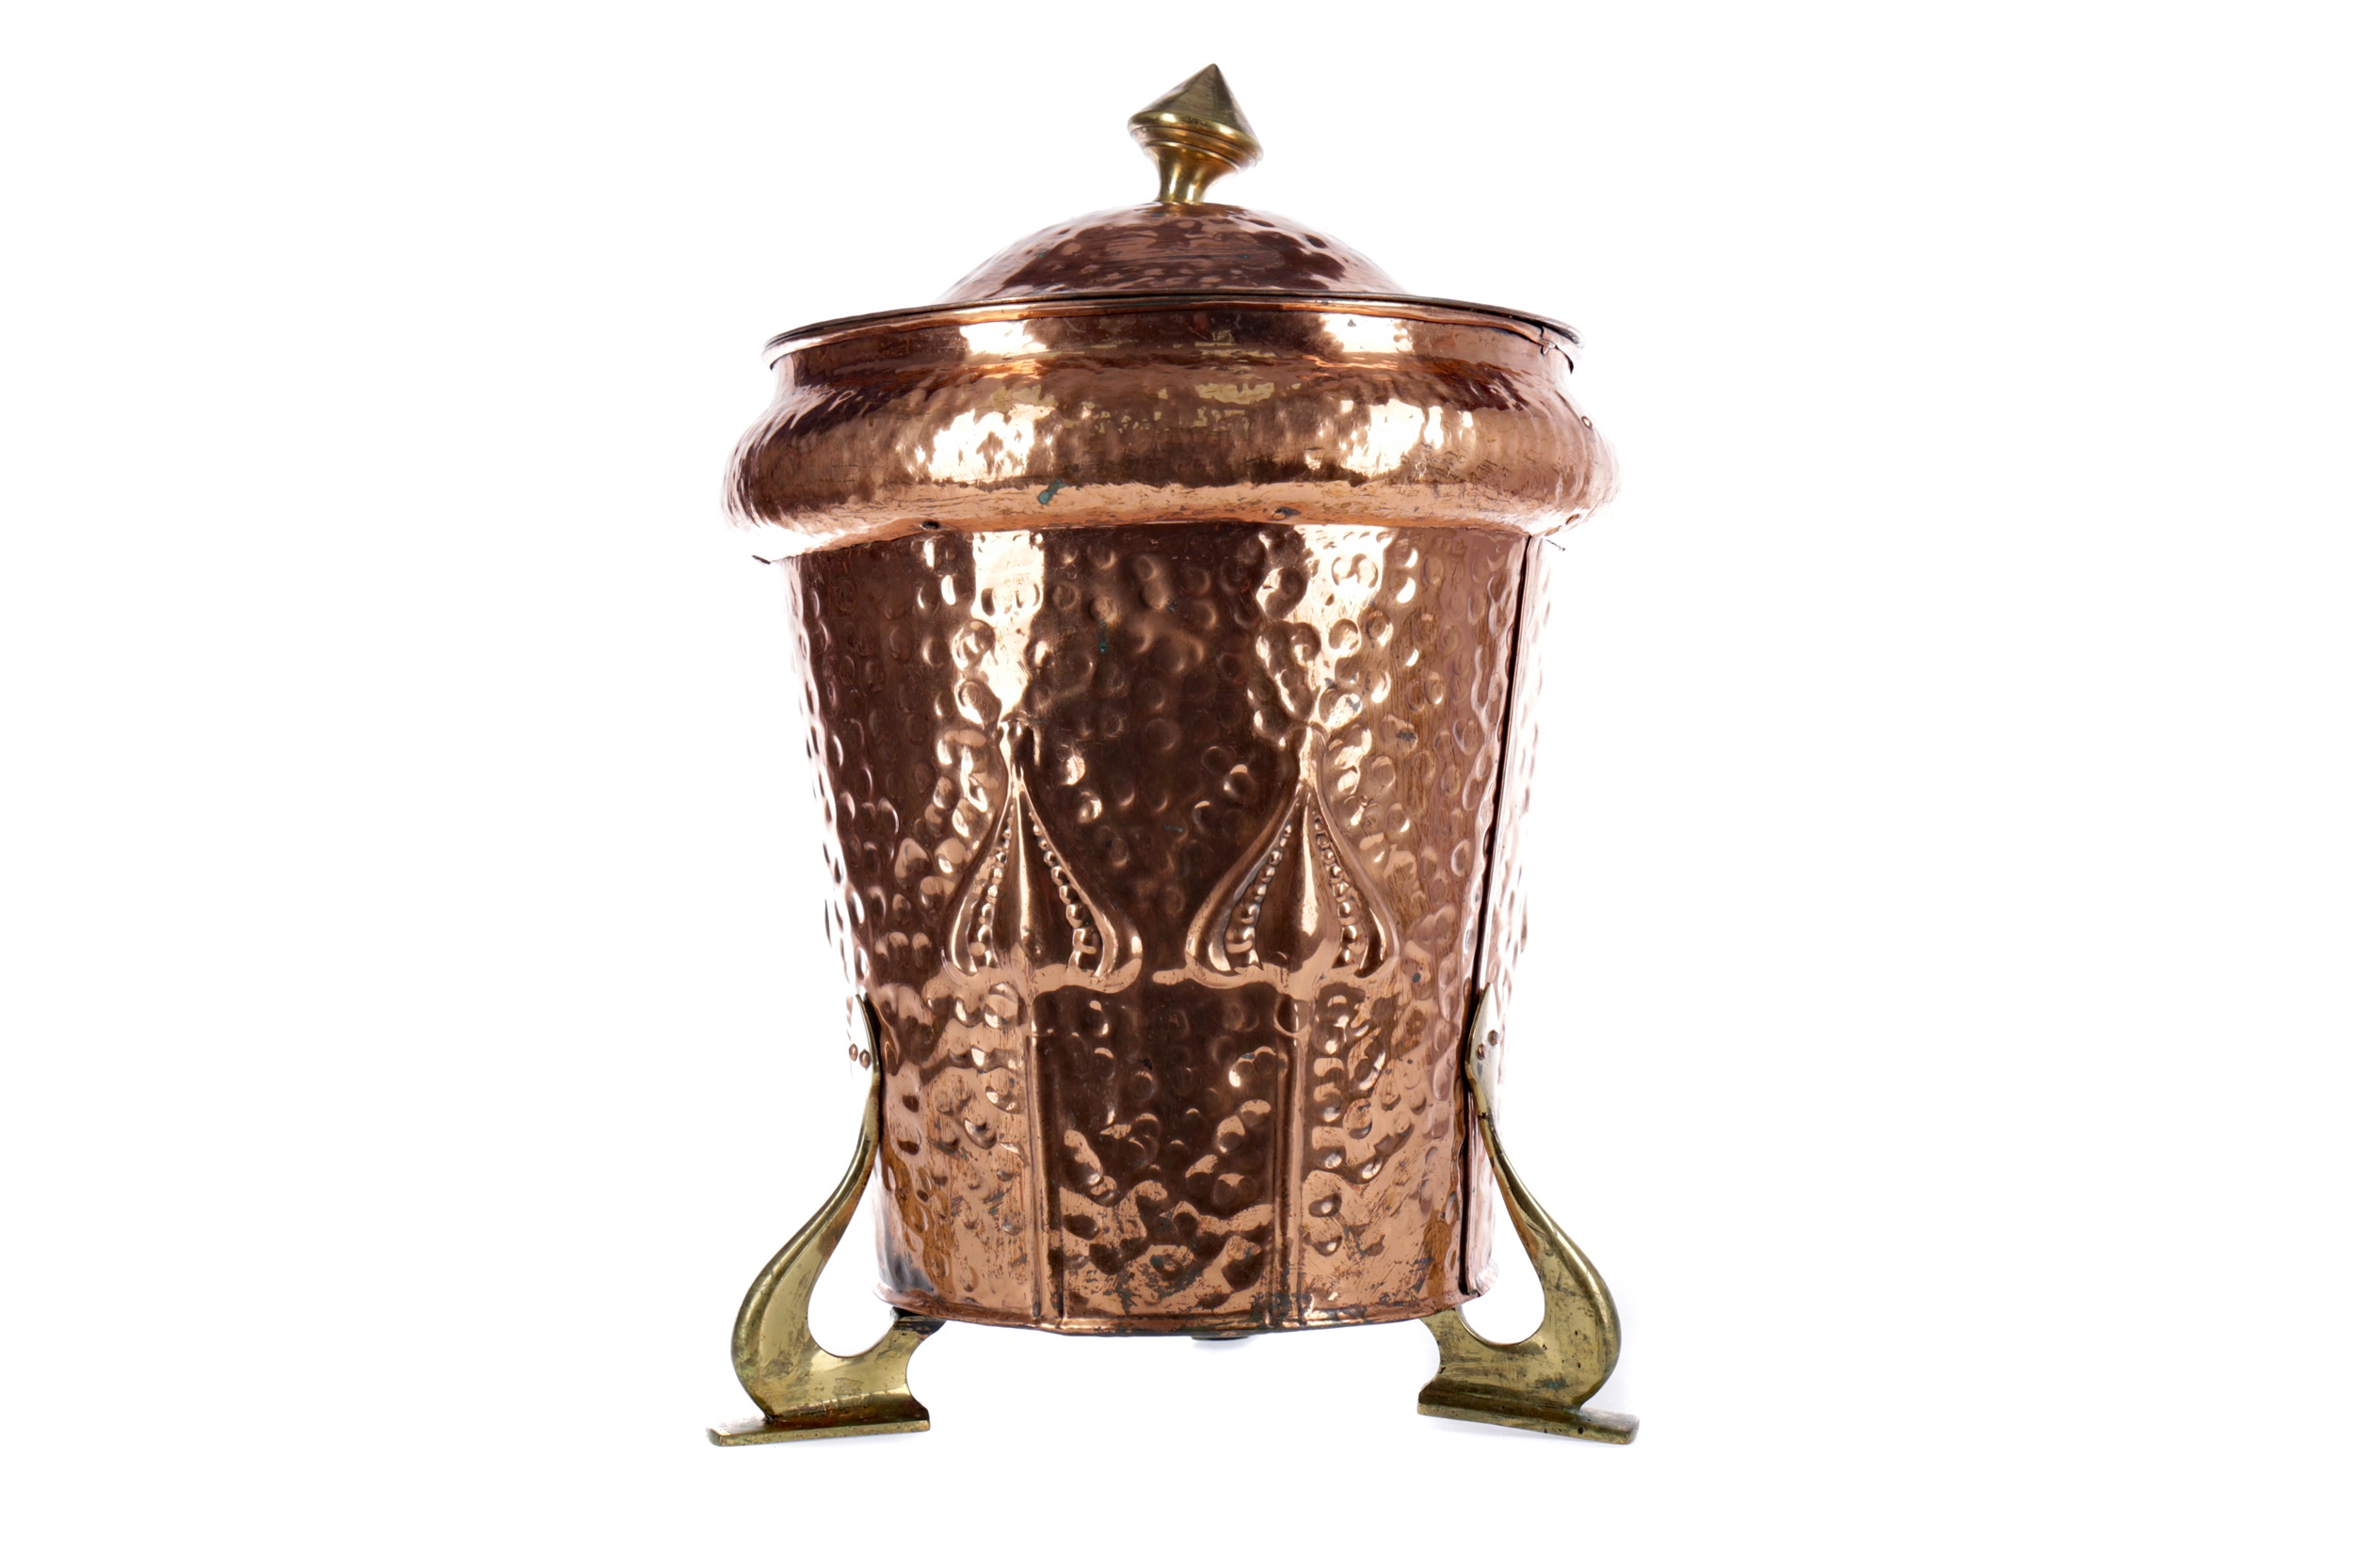 AN ARTS & CRAFTS HAMMERED COPPER COAL BIN AND COVER